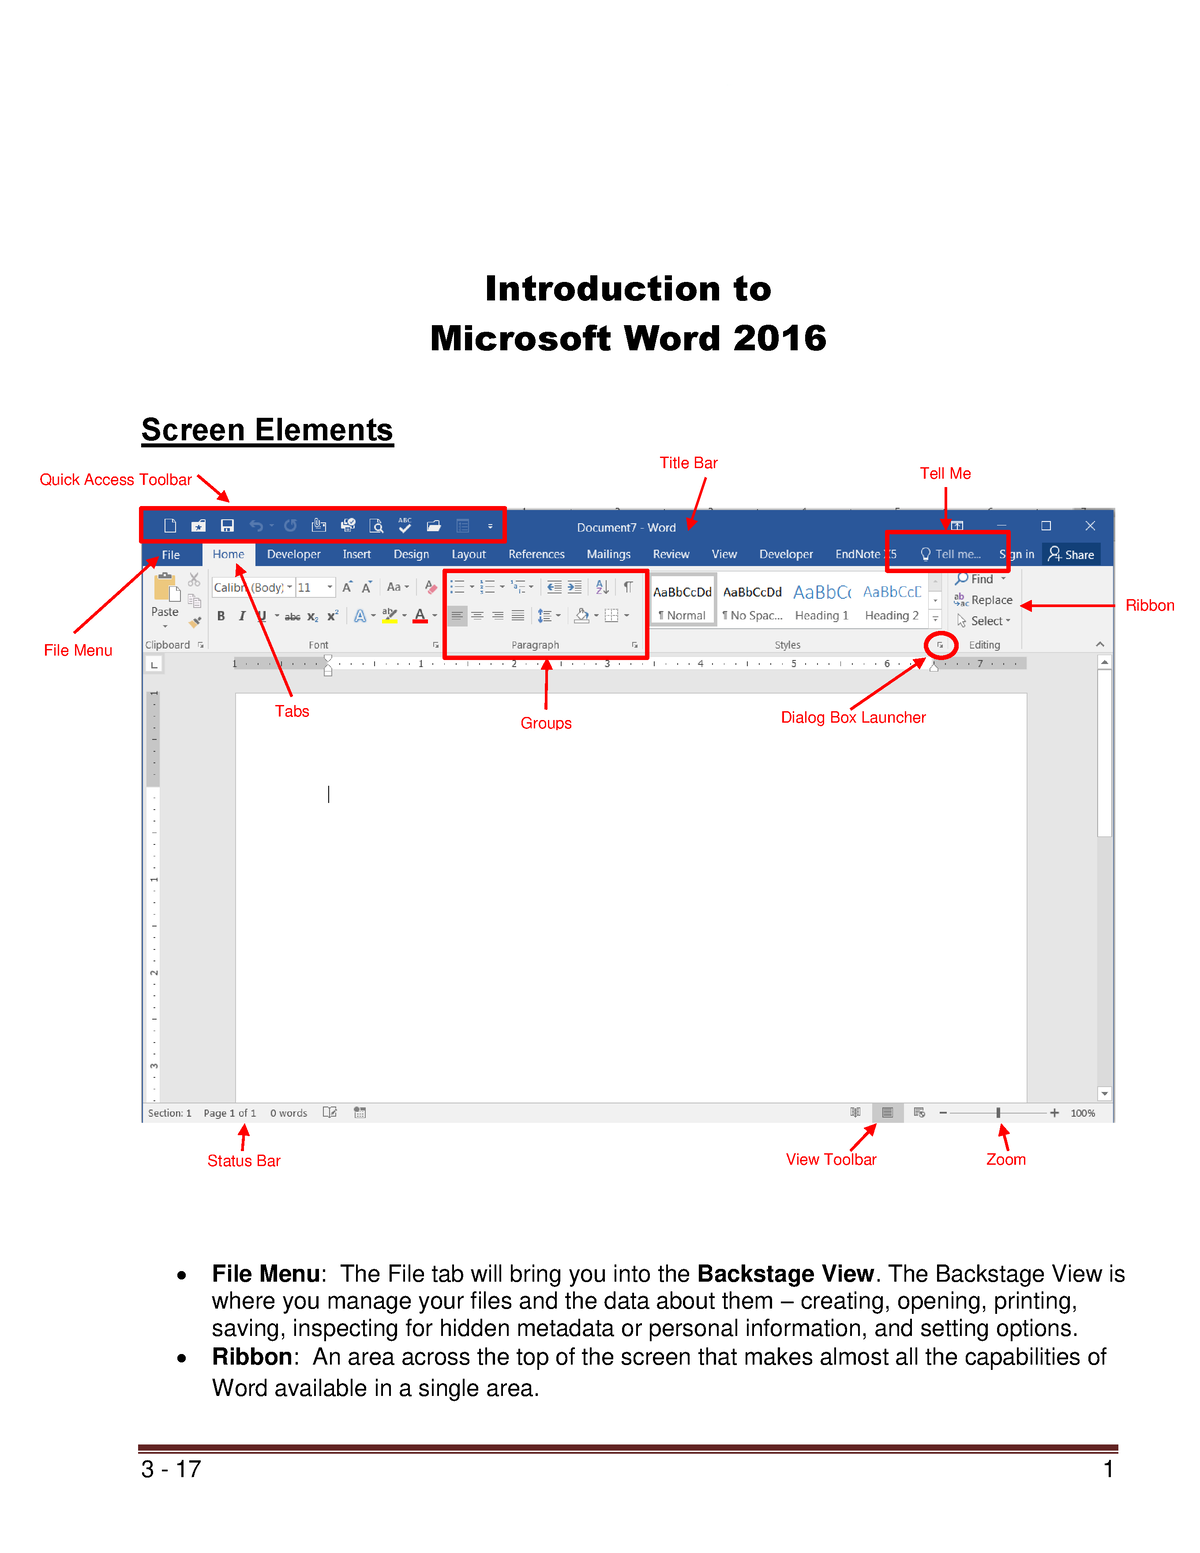 Introduction To Word 2016 3 17 1 Introduction To Microsoft Word 2016 Screen Elements File 0685